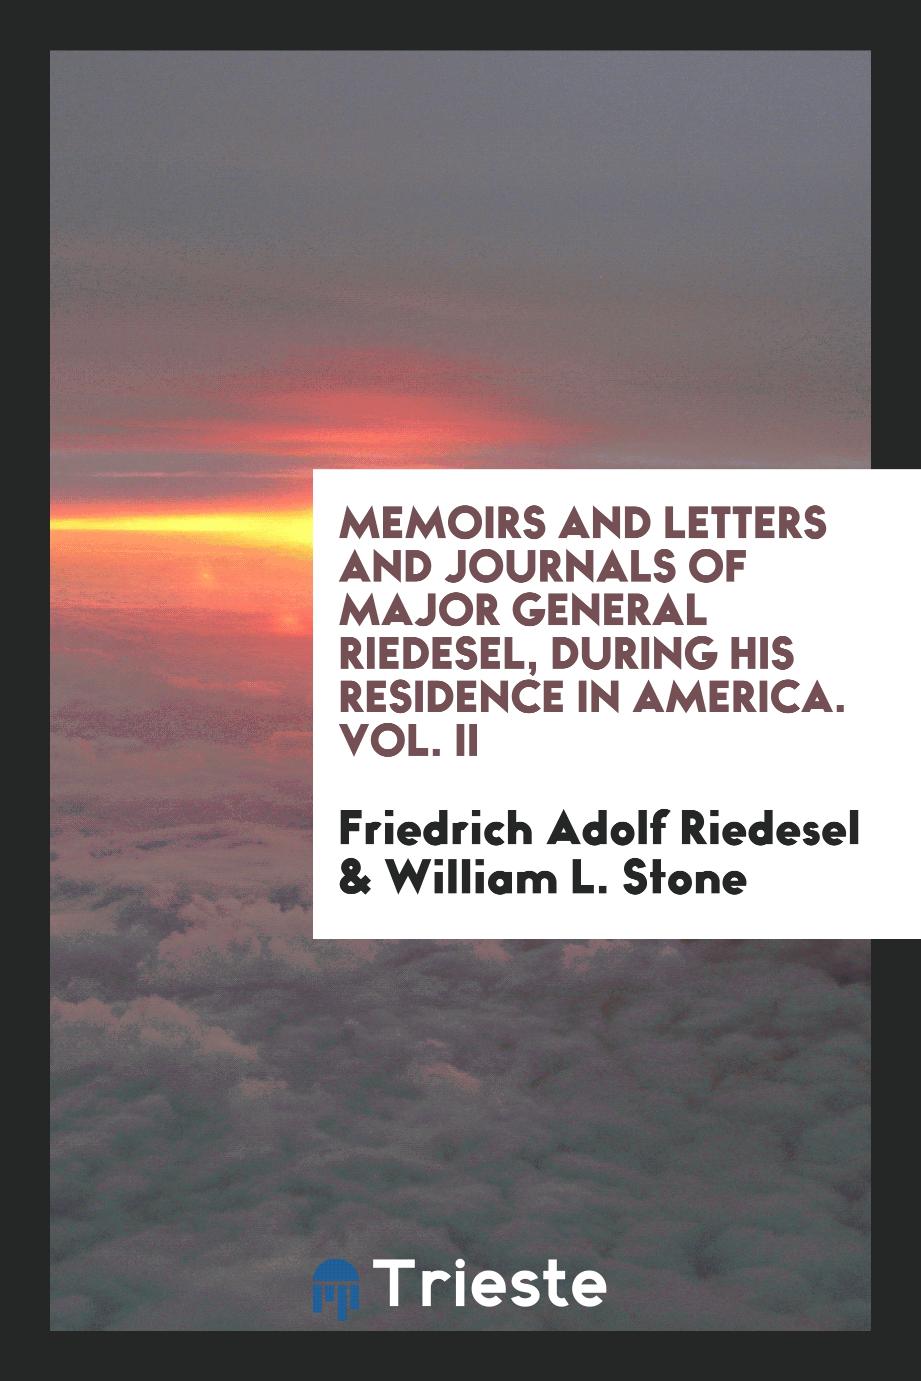 Memoirs and Letters and Journals of Major General Riedesel, During His Residence in America. Vol. II